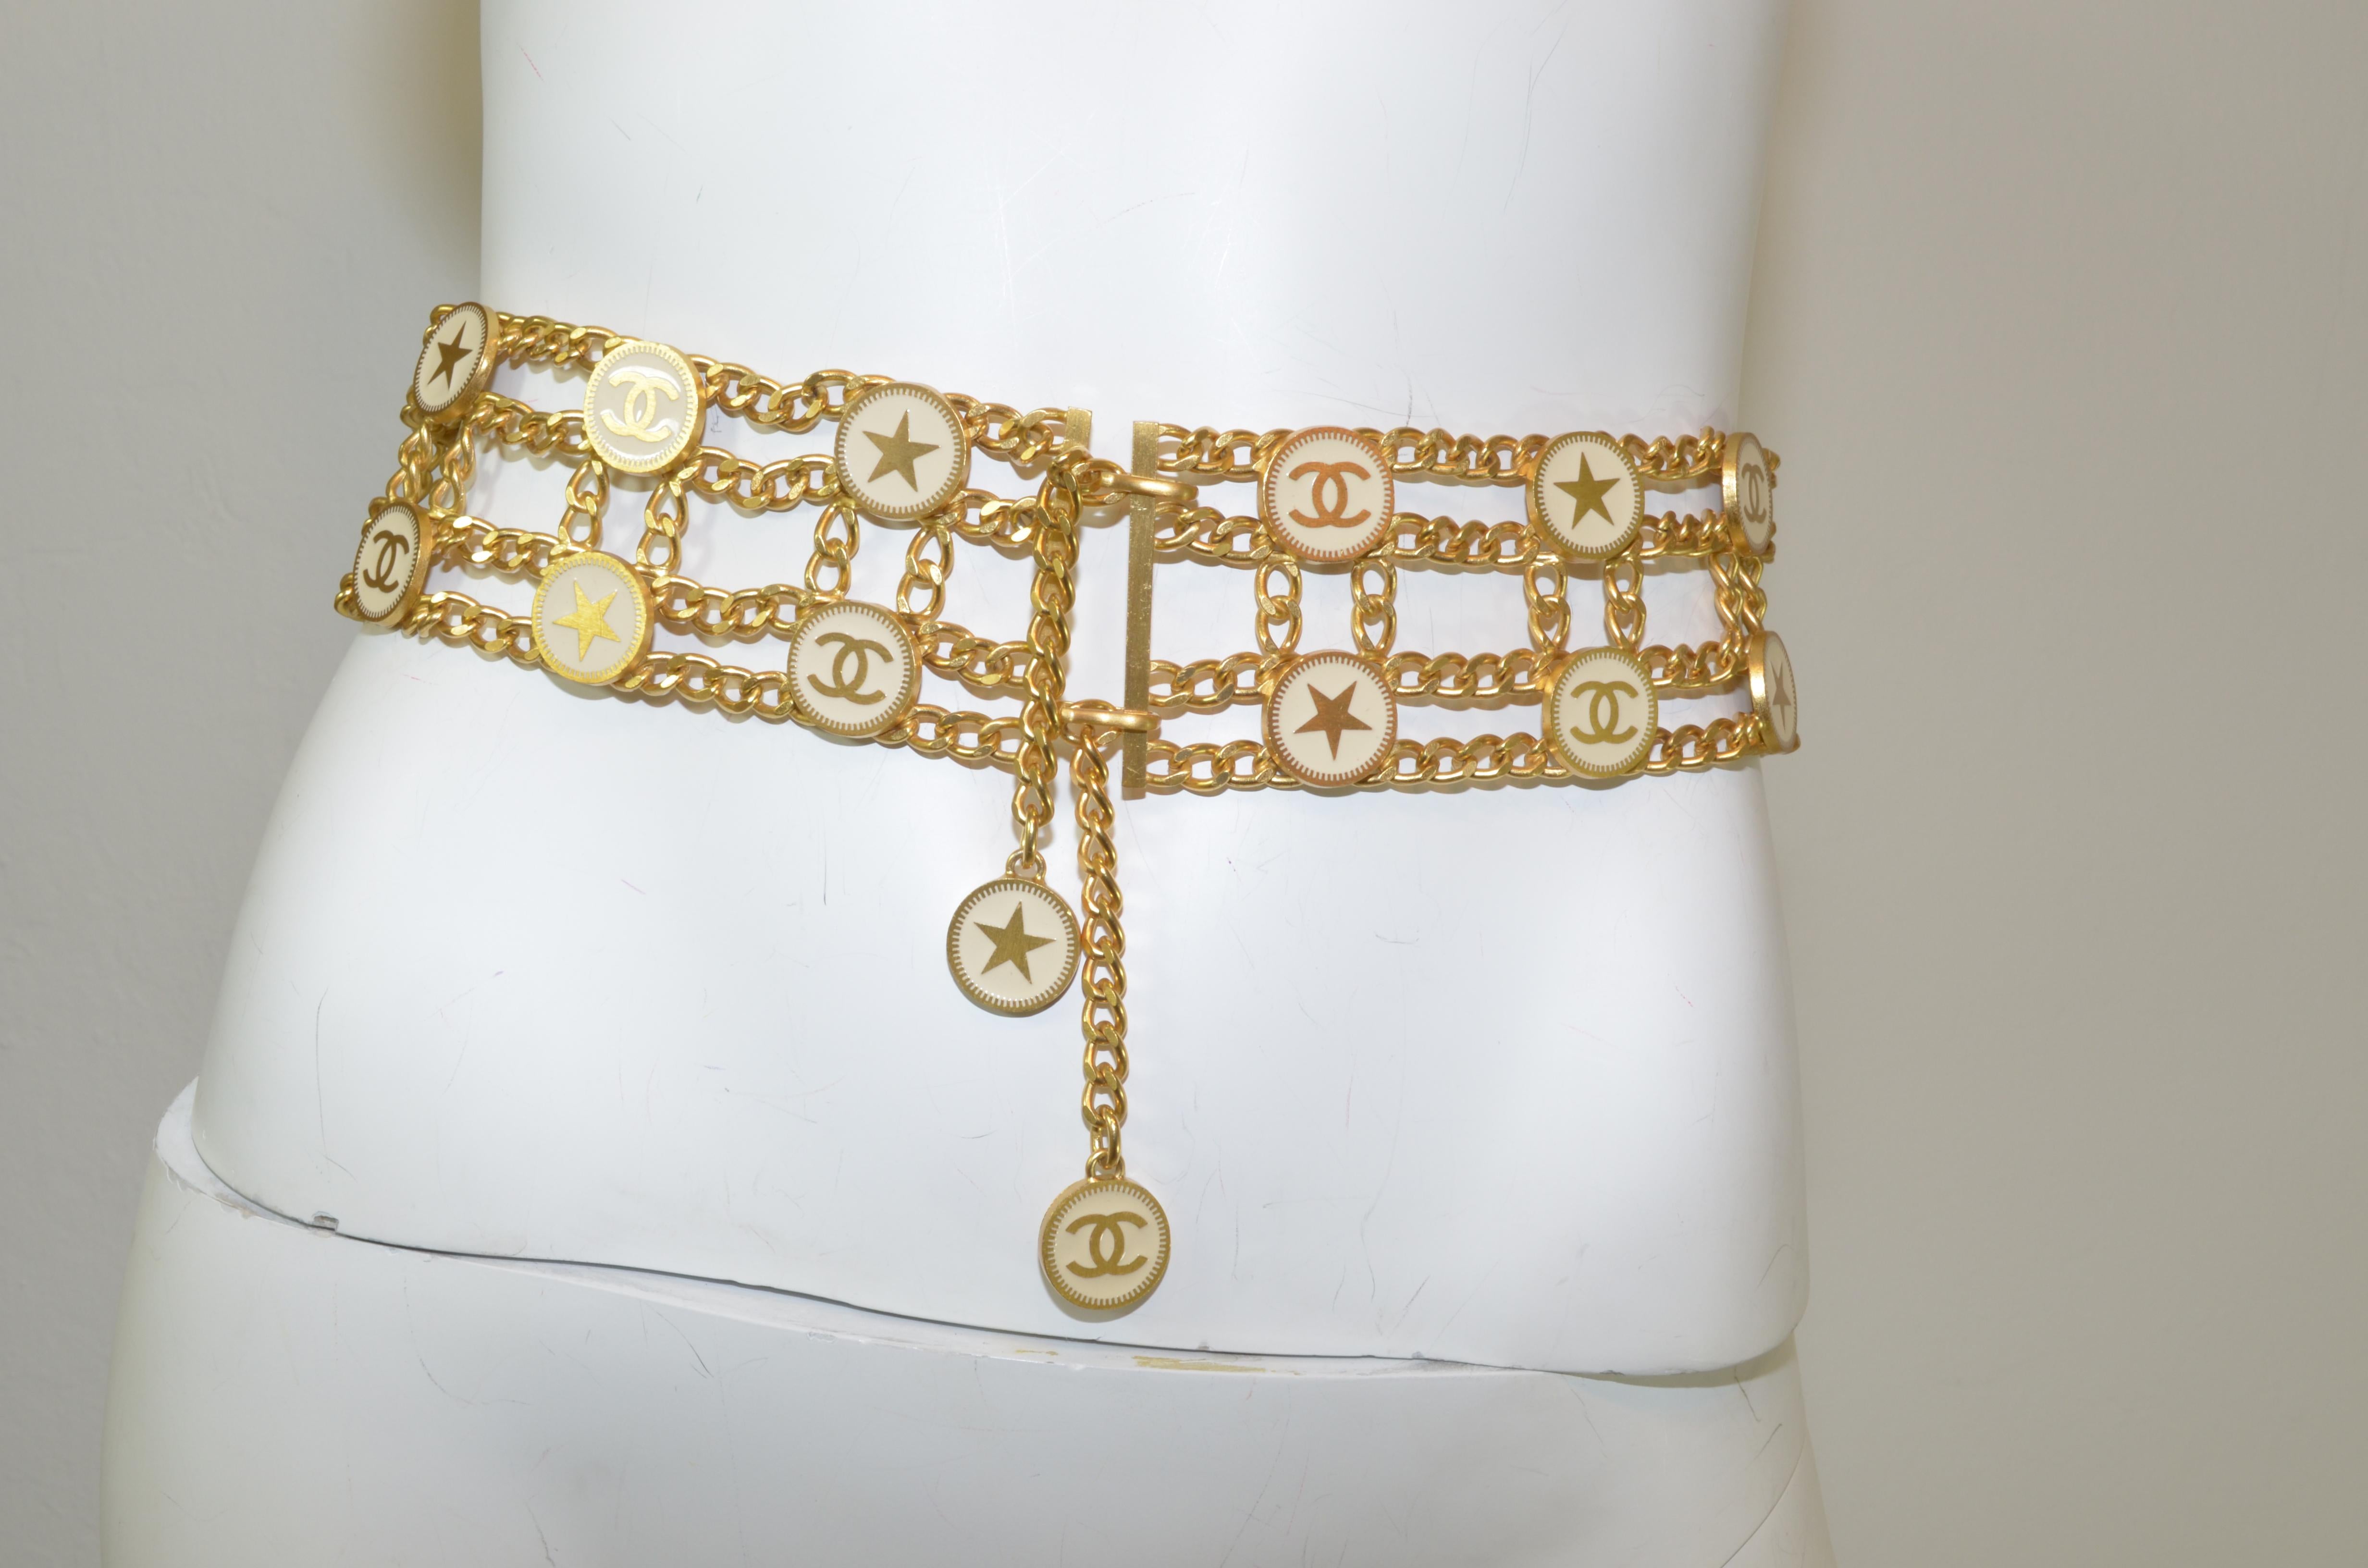 Chanel belt is featured in a gold-tone metal with a signature 